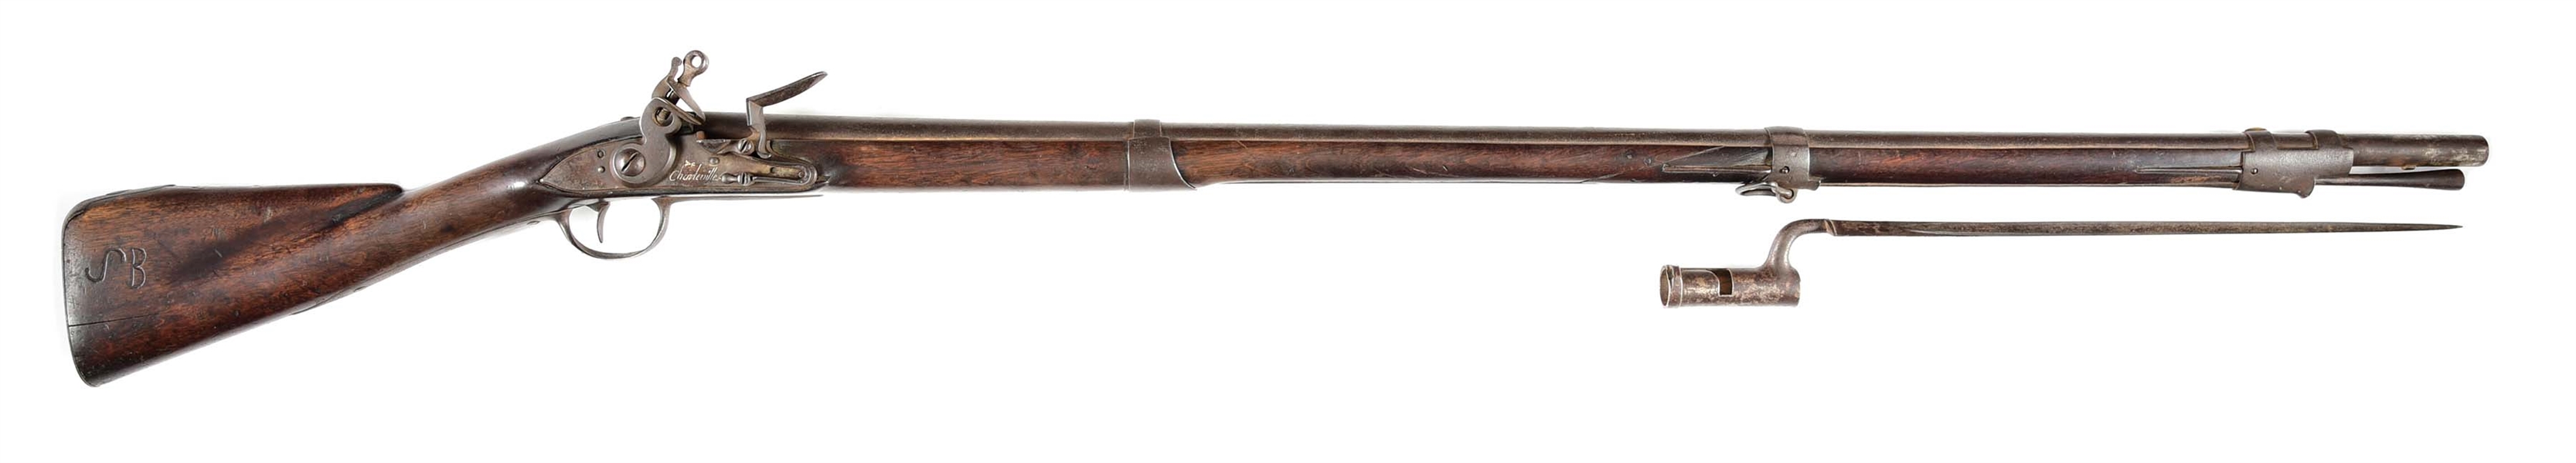 (A) A RARE FRENCH M1763 MUSKET MARKED TO THE 1ST NEW HAMPSHIRE BATTALION, WITH BAYONET.